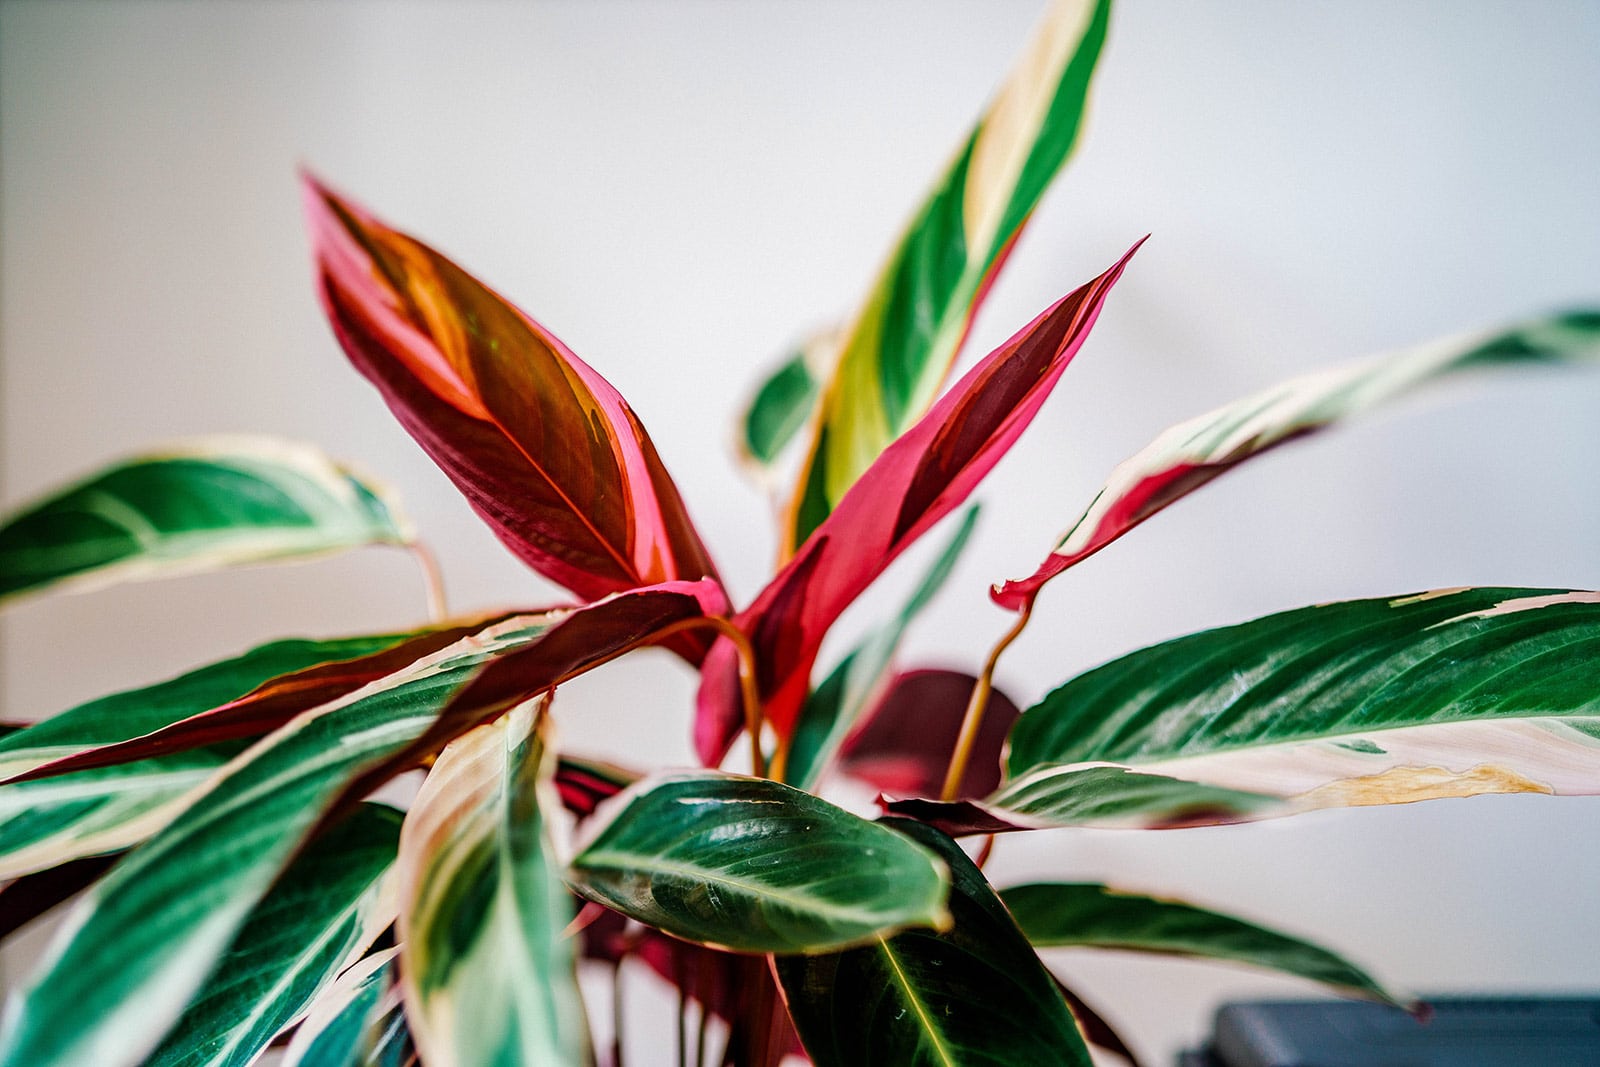 Stromanthe Triostar houseplant set against a white background with focus on reddish-pink leaves in the center